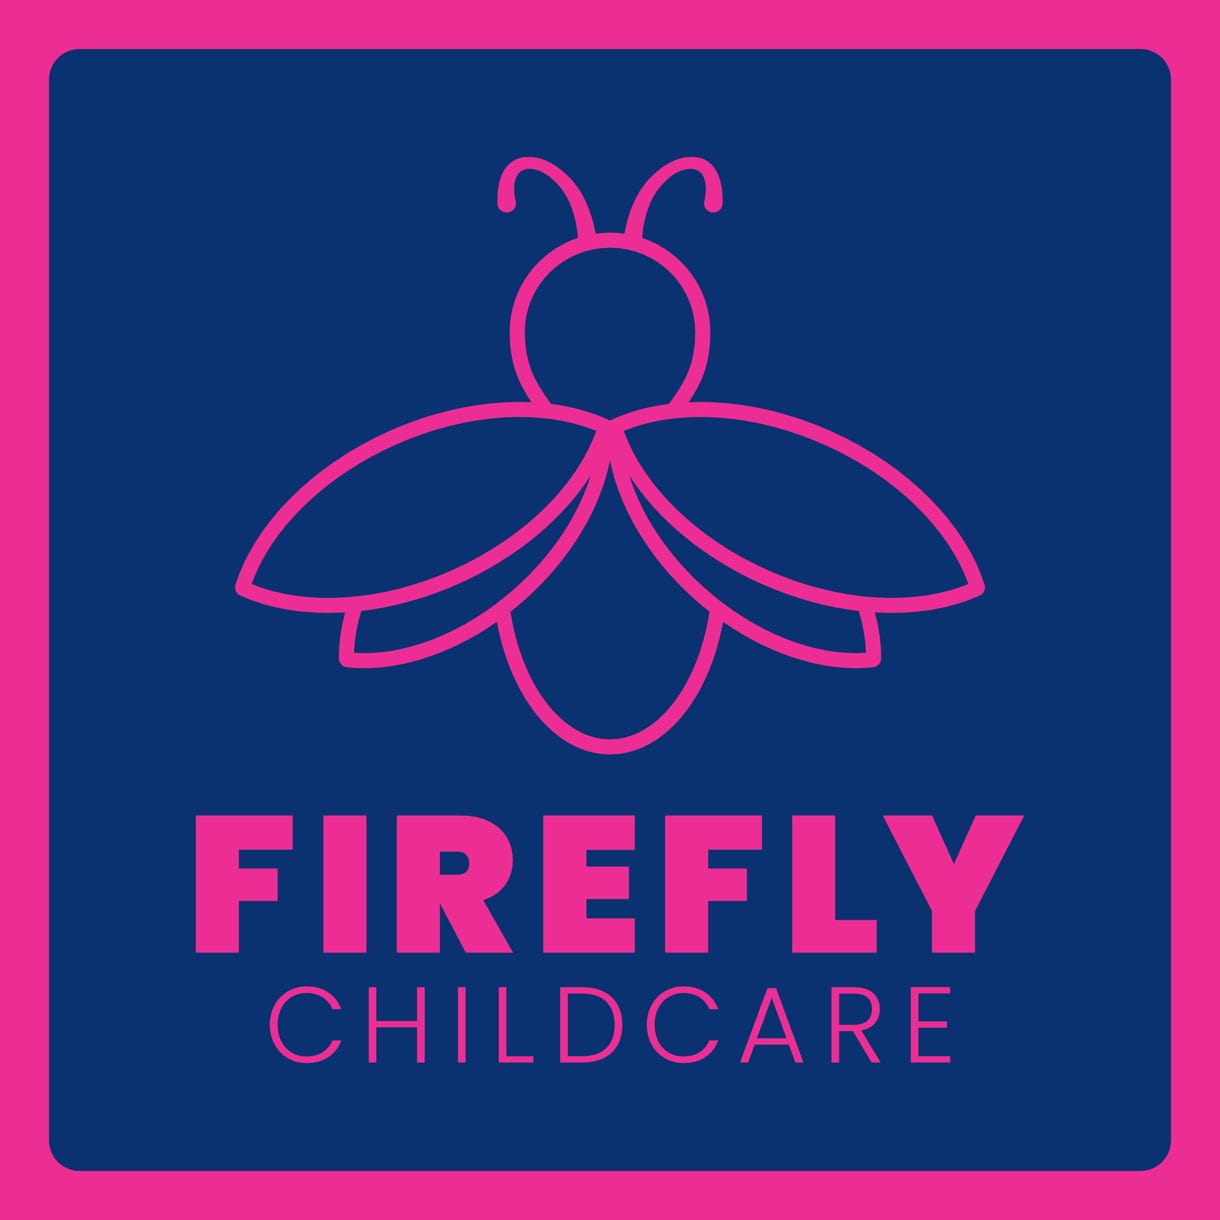 Firefly Childcare - Logo Design with Background